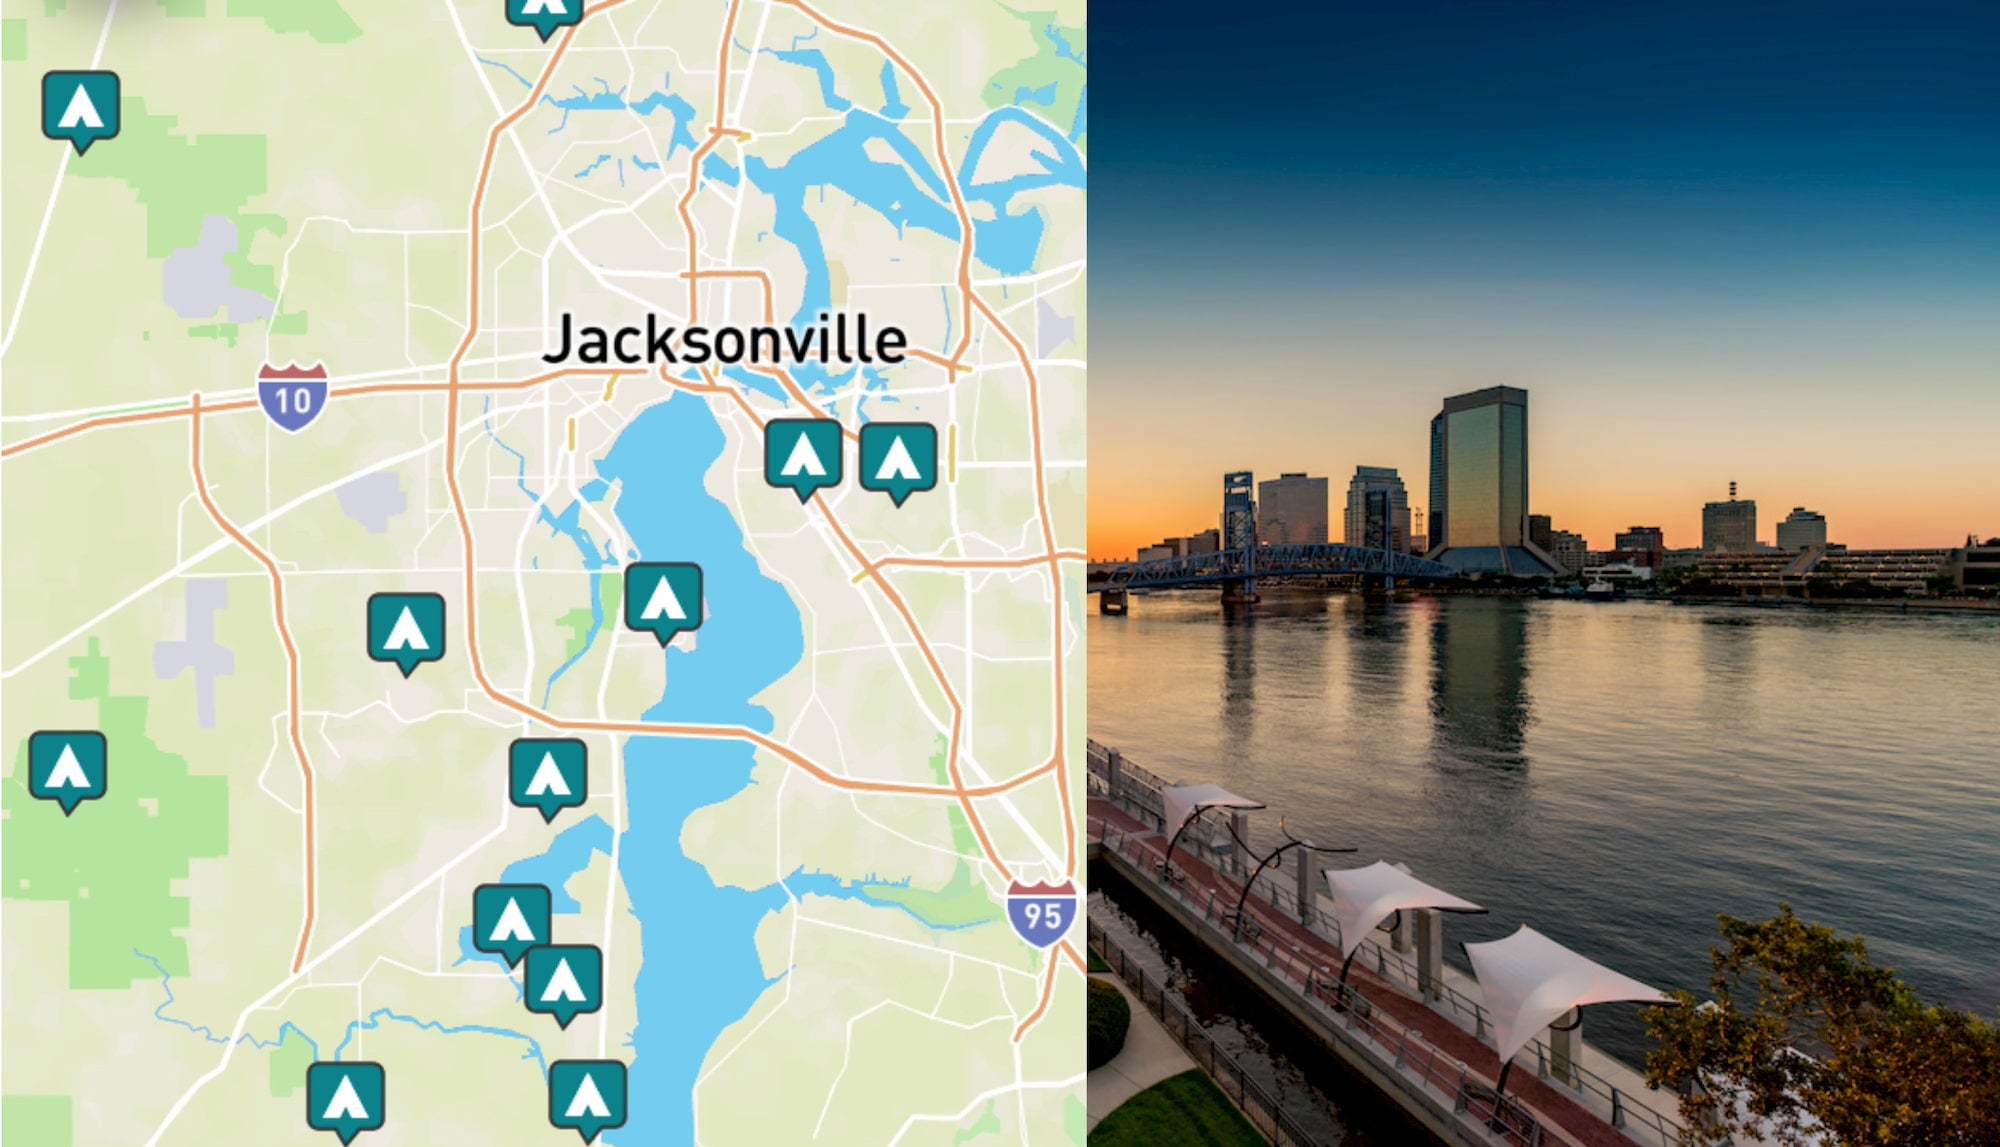 side-by-side images of Jacksonville Florida, and a map of campgrounds near Jacksonville